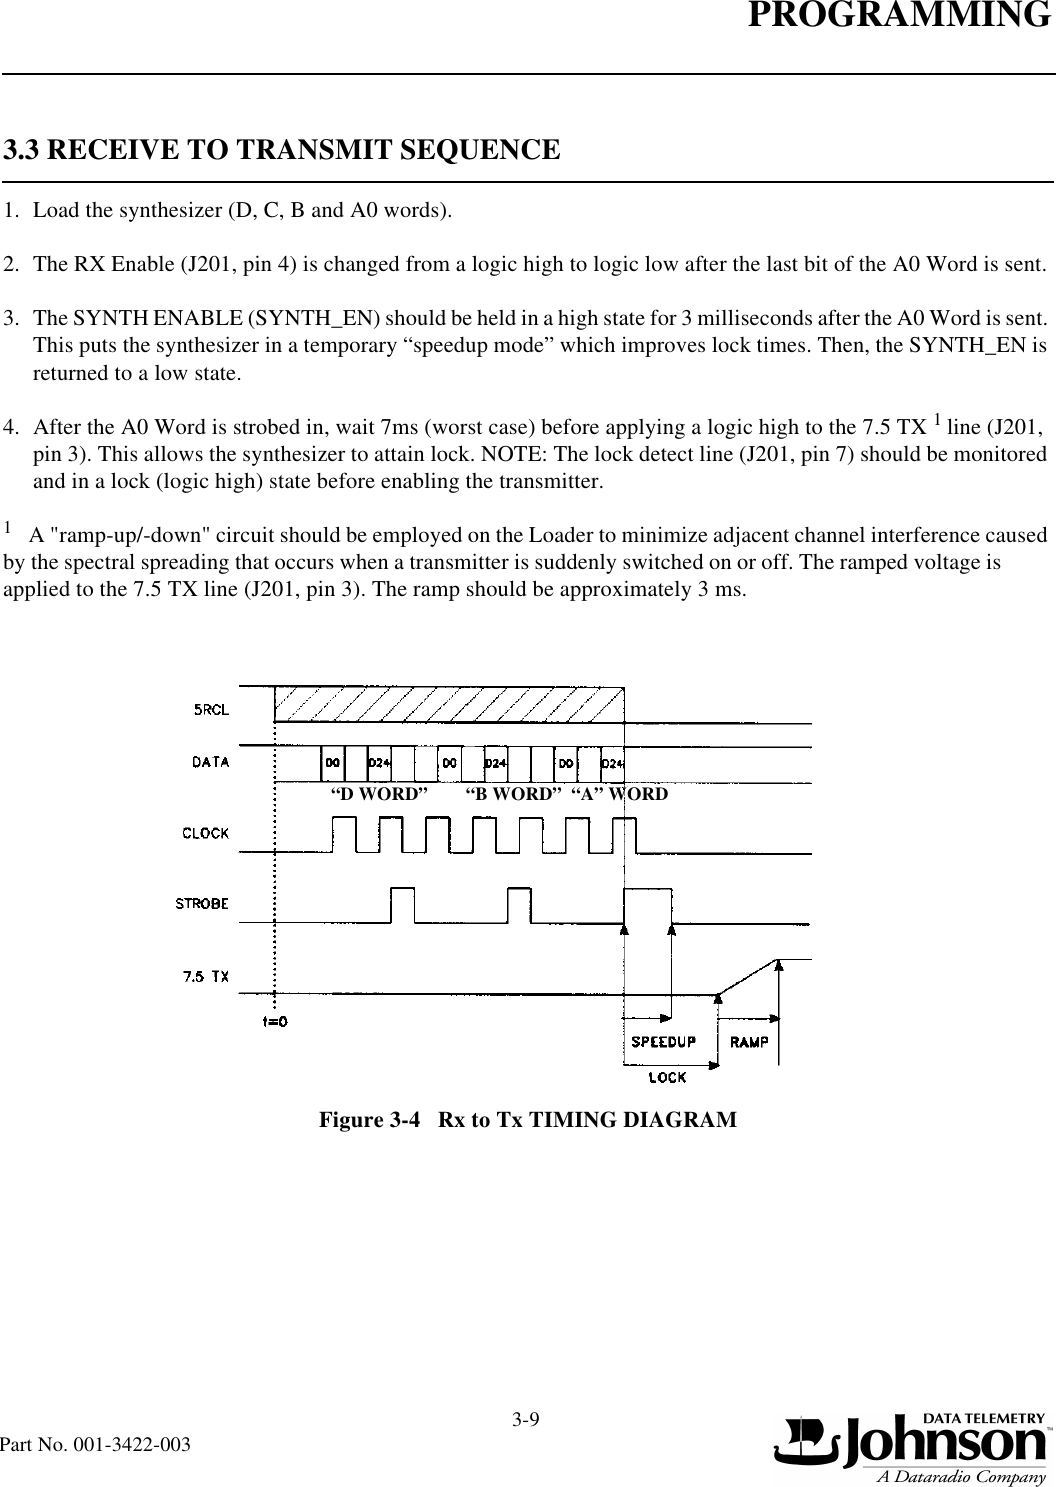 PROGRAMMING3-9  Part No. 001-3422-0033.3 RECEIVE TO TRANSMIT SEQUENCE1. Load the synthesizer (D, C, B and A0 words).2. The RX Enable (J201, pin 4) is changed from a logic high to logic low after the last bit of the A0 Word is sent.3. The SYNTH ENABLE (SYNTH_EN) should be held in a high state for 3 milliseconds after the A0 Word is sent. This puts the synthesizer in a temporary “speedup mode” which improves lock times. Then, the SYNTH_EN is returned to a low state.4. After the A0 Word is strobed in, wait 7ms (worst case) before applying a logic high to the 7.5 TX 1 line (J201, pin 3). This allows the synthesizer to attain lock. NOTE: The lock detect line (J201, pin 7) should be monitored and in a lock (logic high) state before enabling the transmitter.1    A &quot;ramp-up/-down&quot; circuit should be employed on the Loader to minimize adjacent channel interference caused by the spectral spreading that occurs when a transmitter is suddenly switched on or off. The ramped voltage is          applied to the 7.5 TX line (J201, pin 3). The ramp should be approximately 3 ms.Figure 3-4   Rx to Tx TIMING DIAGRAM “D WORD”        “B WORD”  “A” WORD